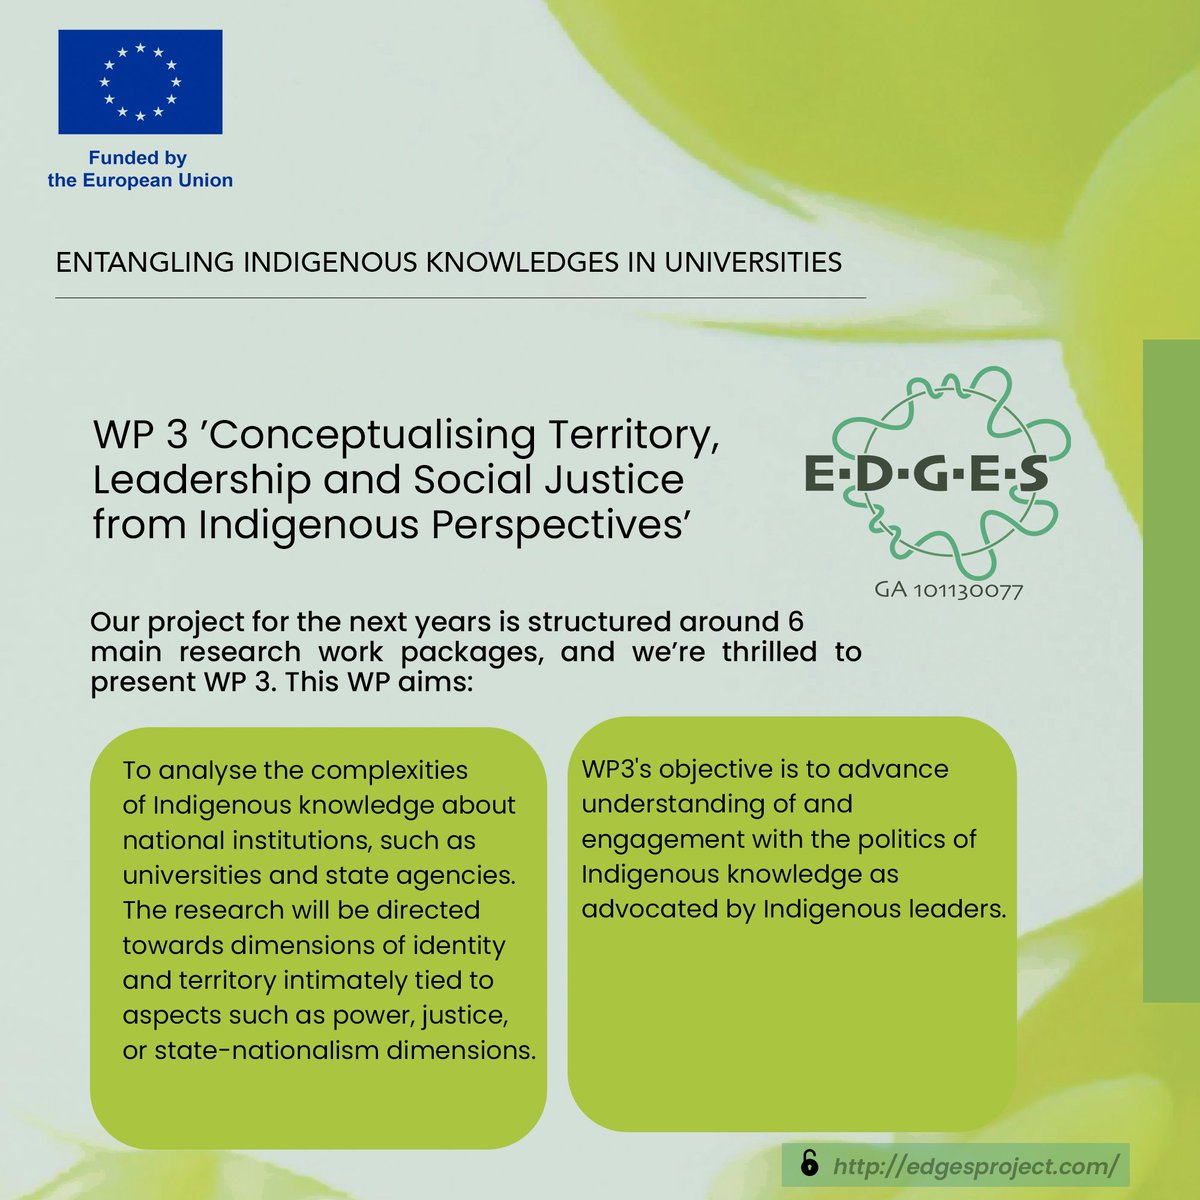 Our project is structured around 6 research WP, and we’re thrilled to present WP 3, Conceptualising Territory, Leadership and Social Justice from Indigenous Perspectives. 🔗linktr.ee/edgesproject 
#IndigenousKnowledges #Ecologies #Epistemologies #PolicyMaking #Education #EDGES